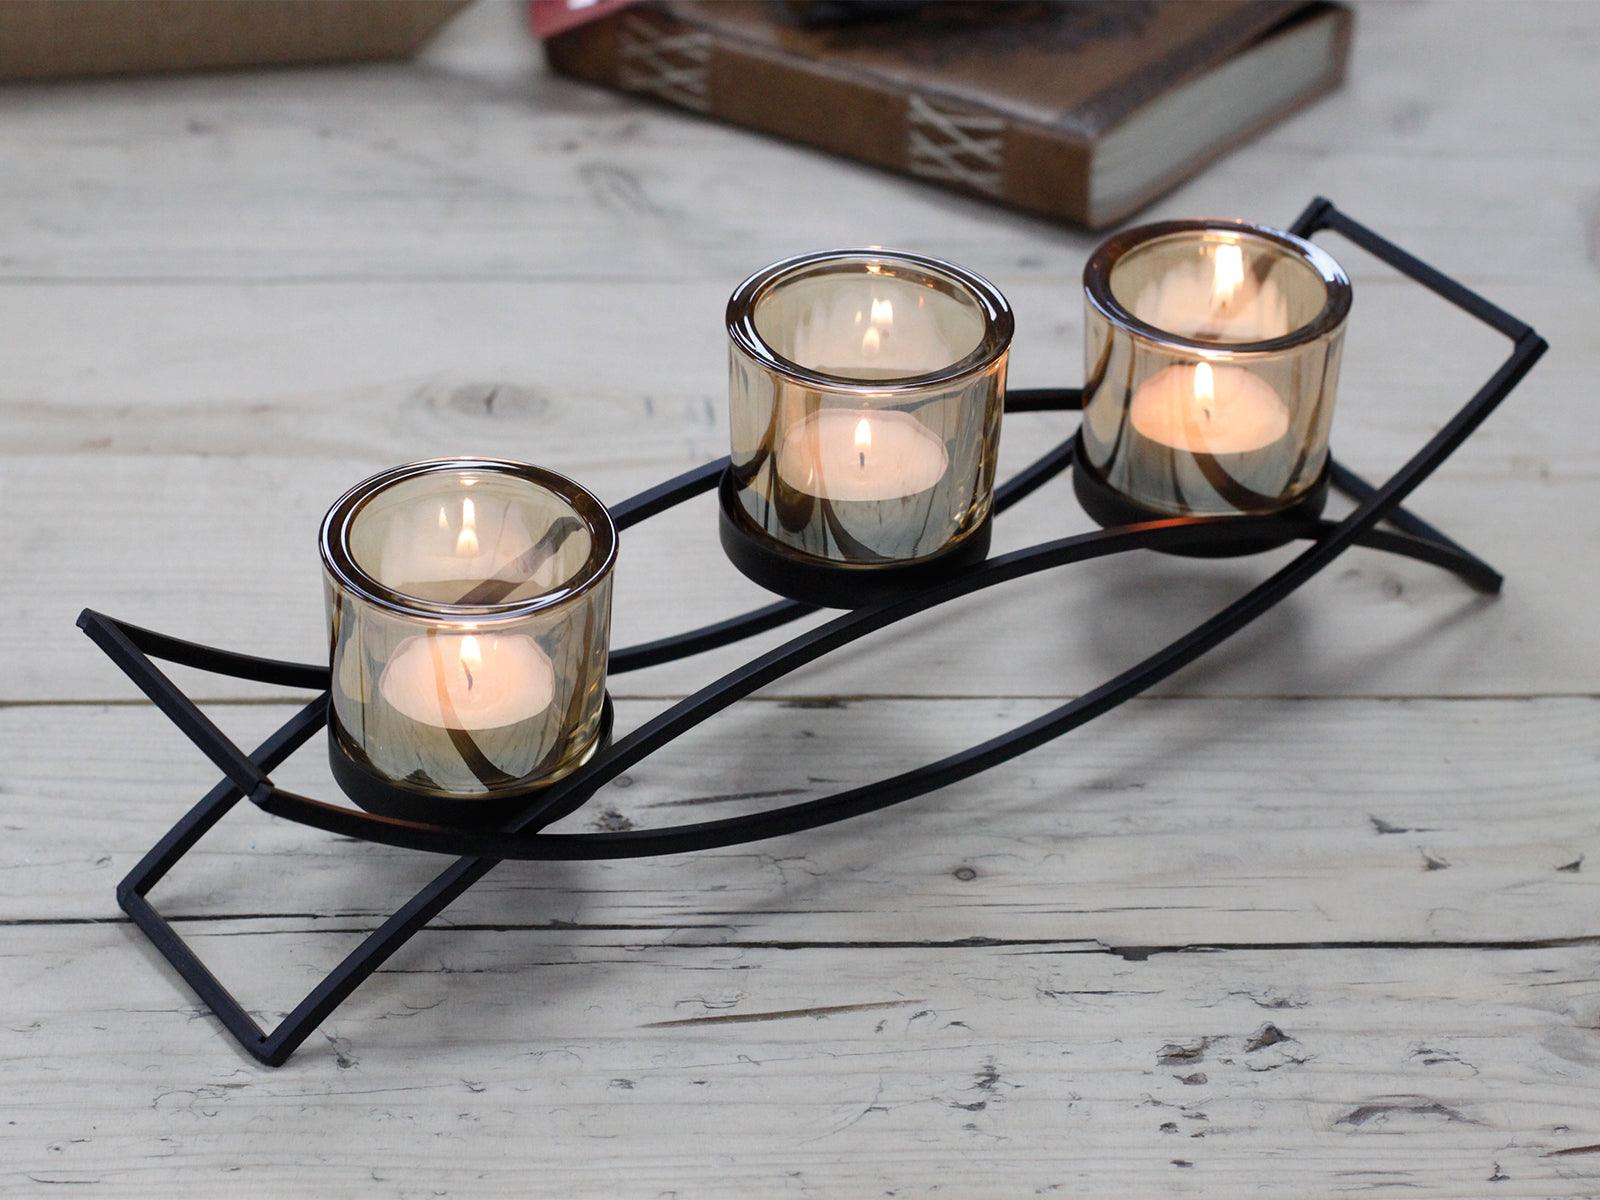 Centrepiece Candle Holders - Charming Spaces